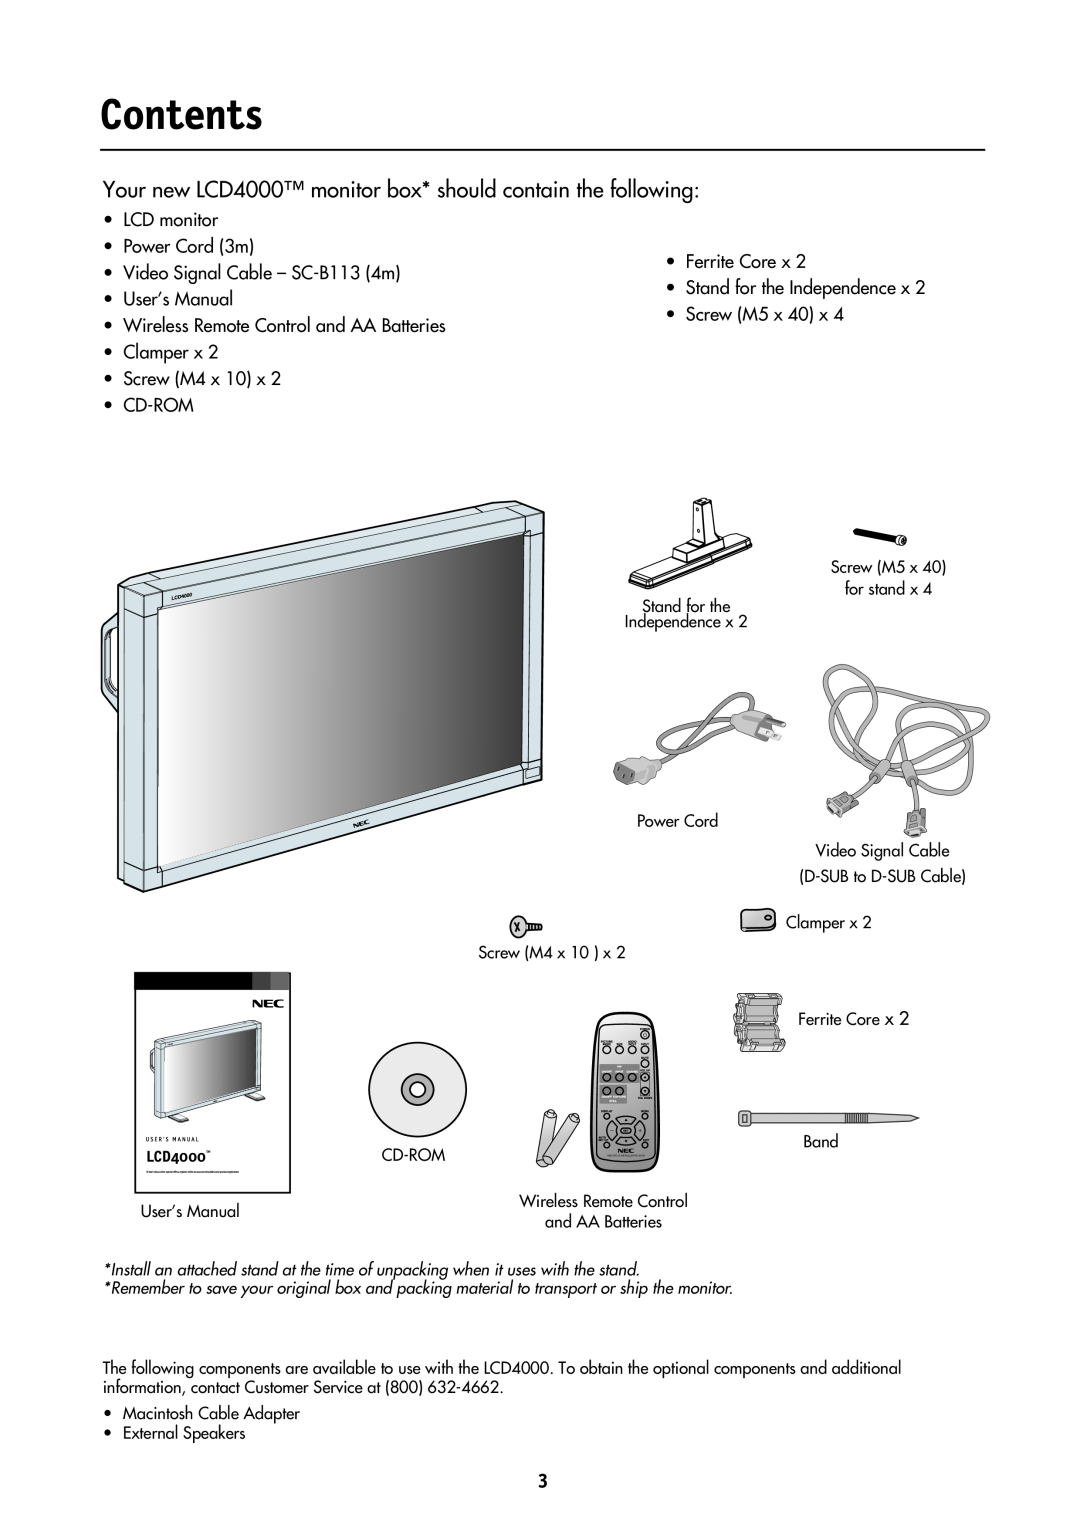 NEC manual Contents, Your new LCD4000 monitor box* should contain the following 